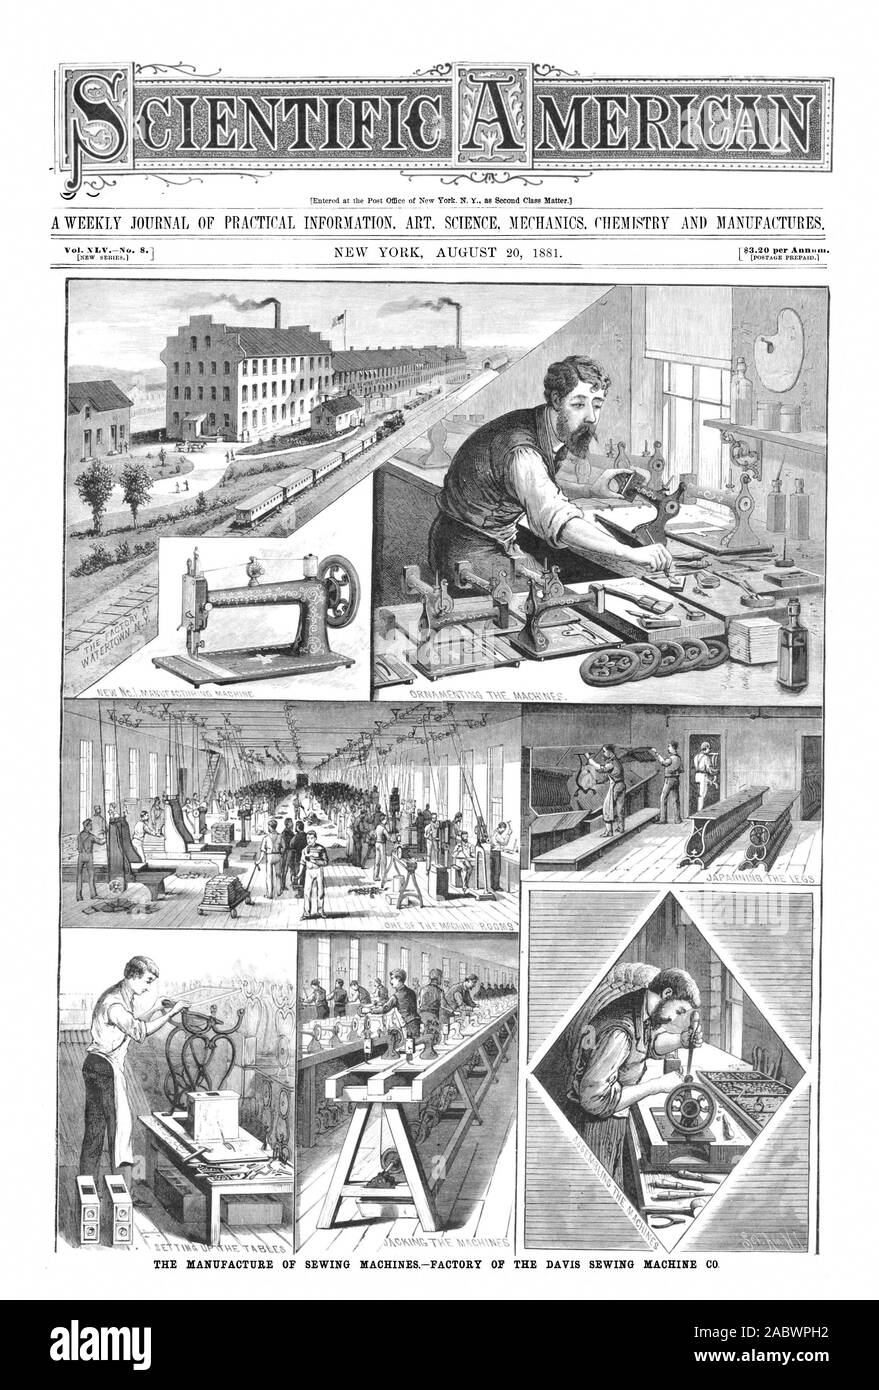 A WEEKLY JOURNAL OF PRACTICAL INFORMATION. ART. SCIENCE MECHANICS. CHEMISTRY AND MANUFACTURES. THE MANUFACTURE OF SEWING MACHINESFACTORY OF THE DAVIS SEWING MACHINE CO., scientific american, 1881-08-20 Stock Photo